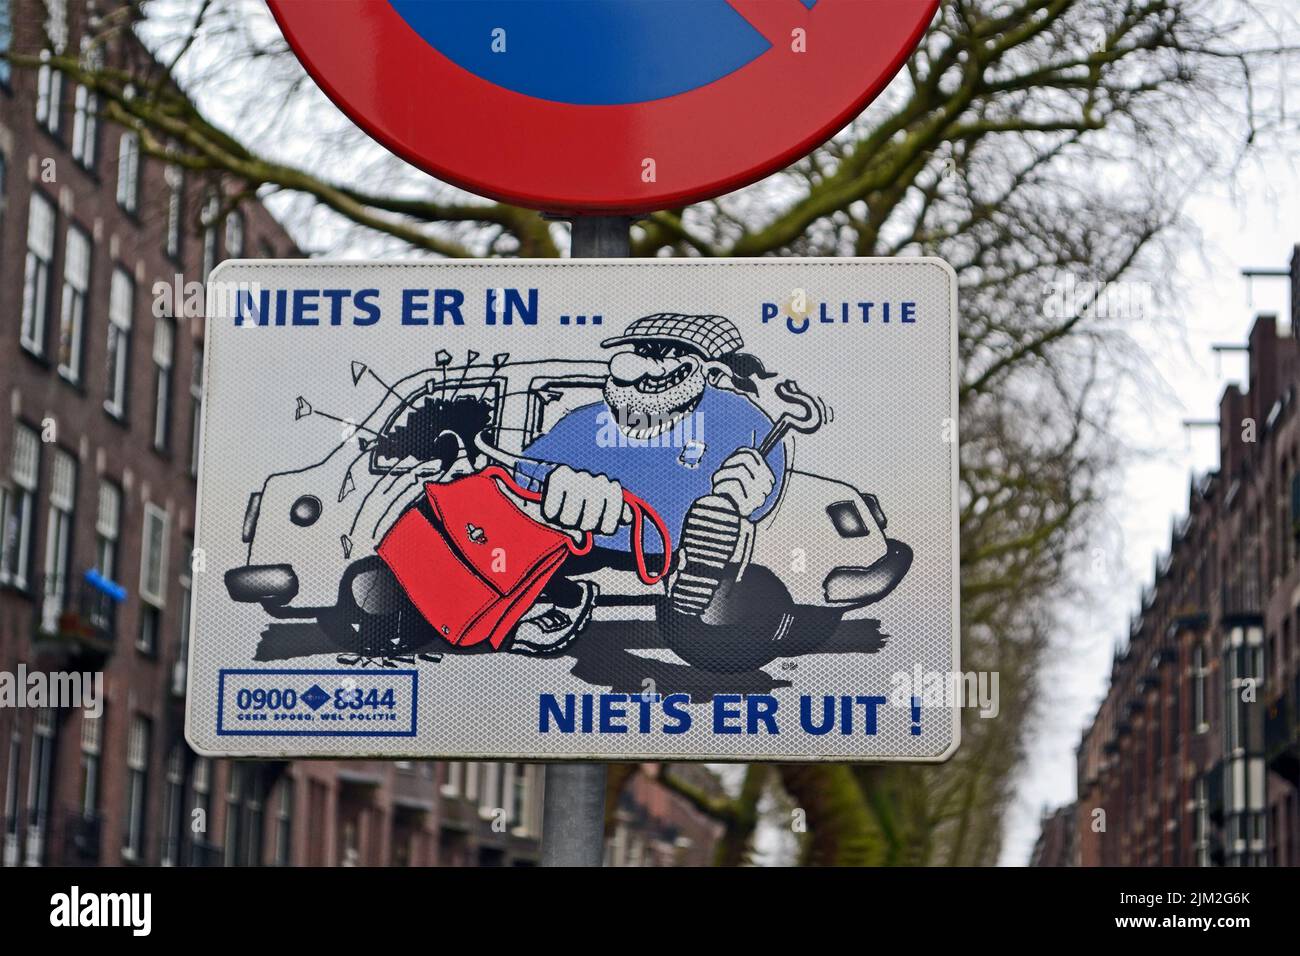 Attention! auto thief activity as road sign in Amsterdam, Netherlands. Stock Photo